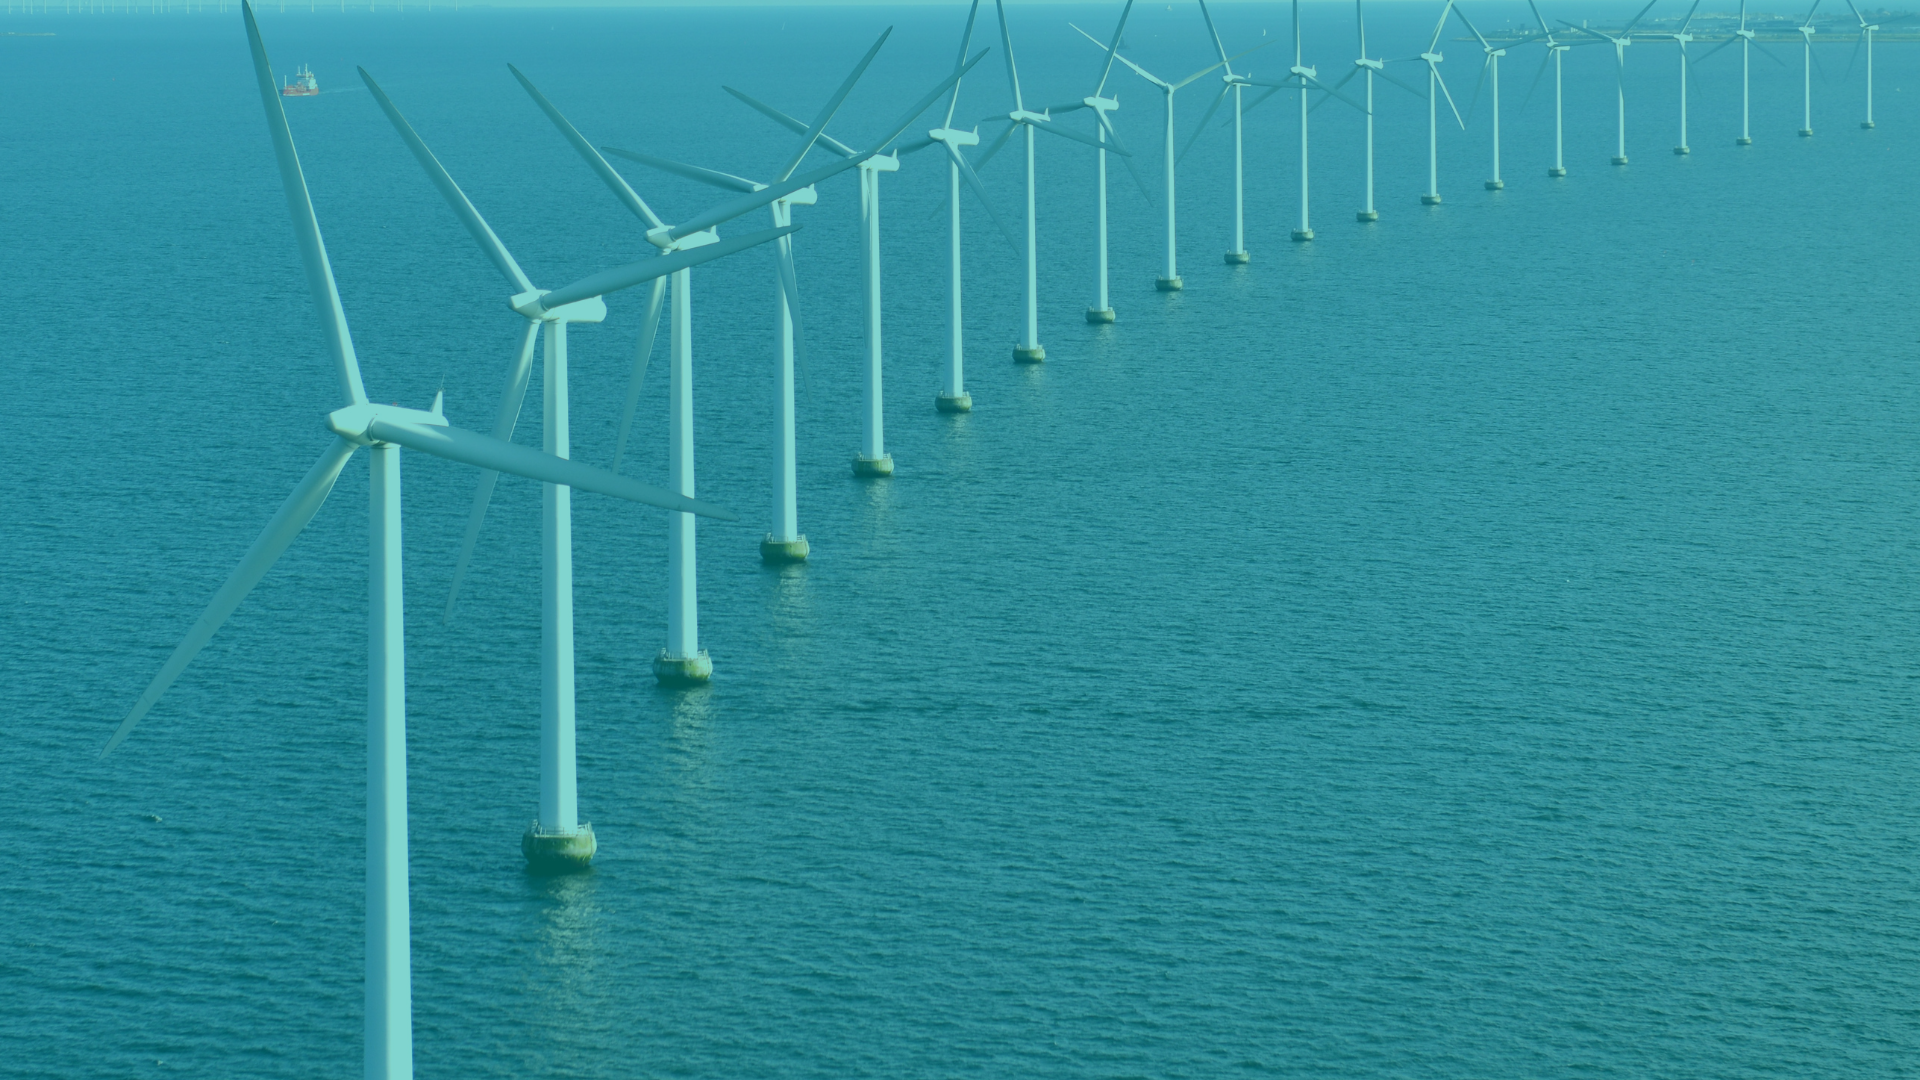 Nineteen wind turbines in a line standing in the sea